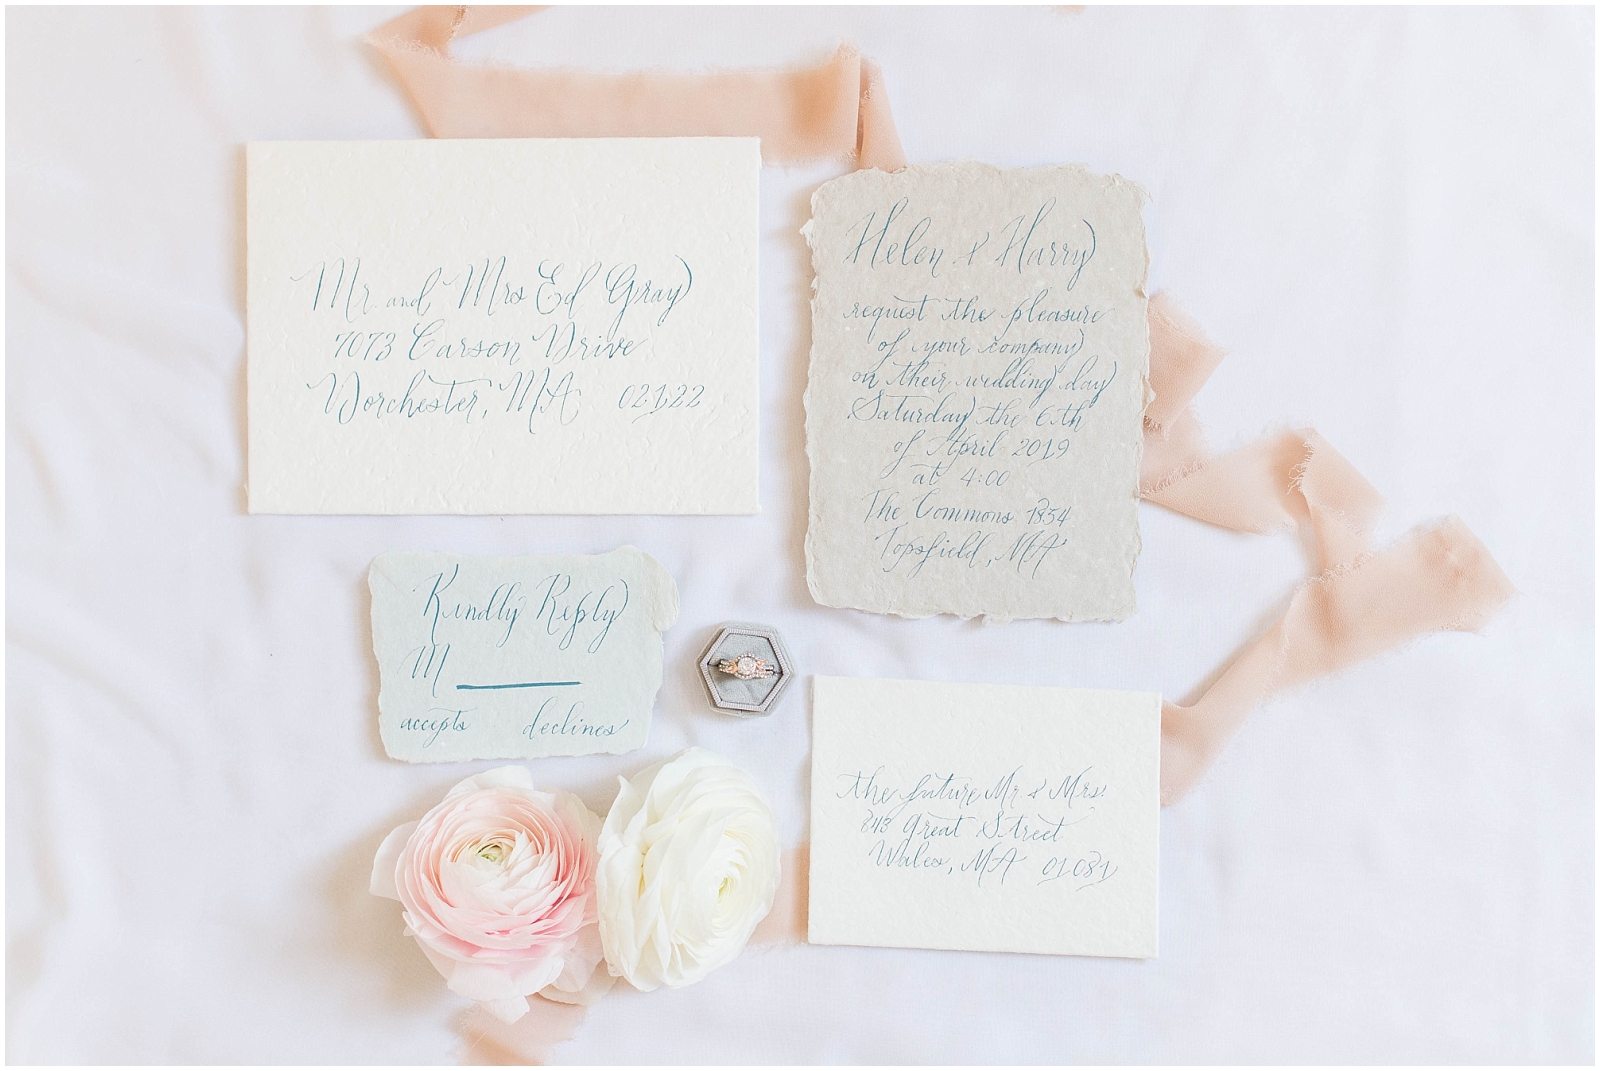 Full invitation suite by Write This Way Calligraphy. Photos by Linda Barry, Boston Wedding Photographer, during the styled wedding shoot at The Commons 1854.